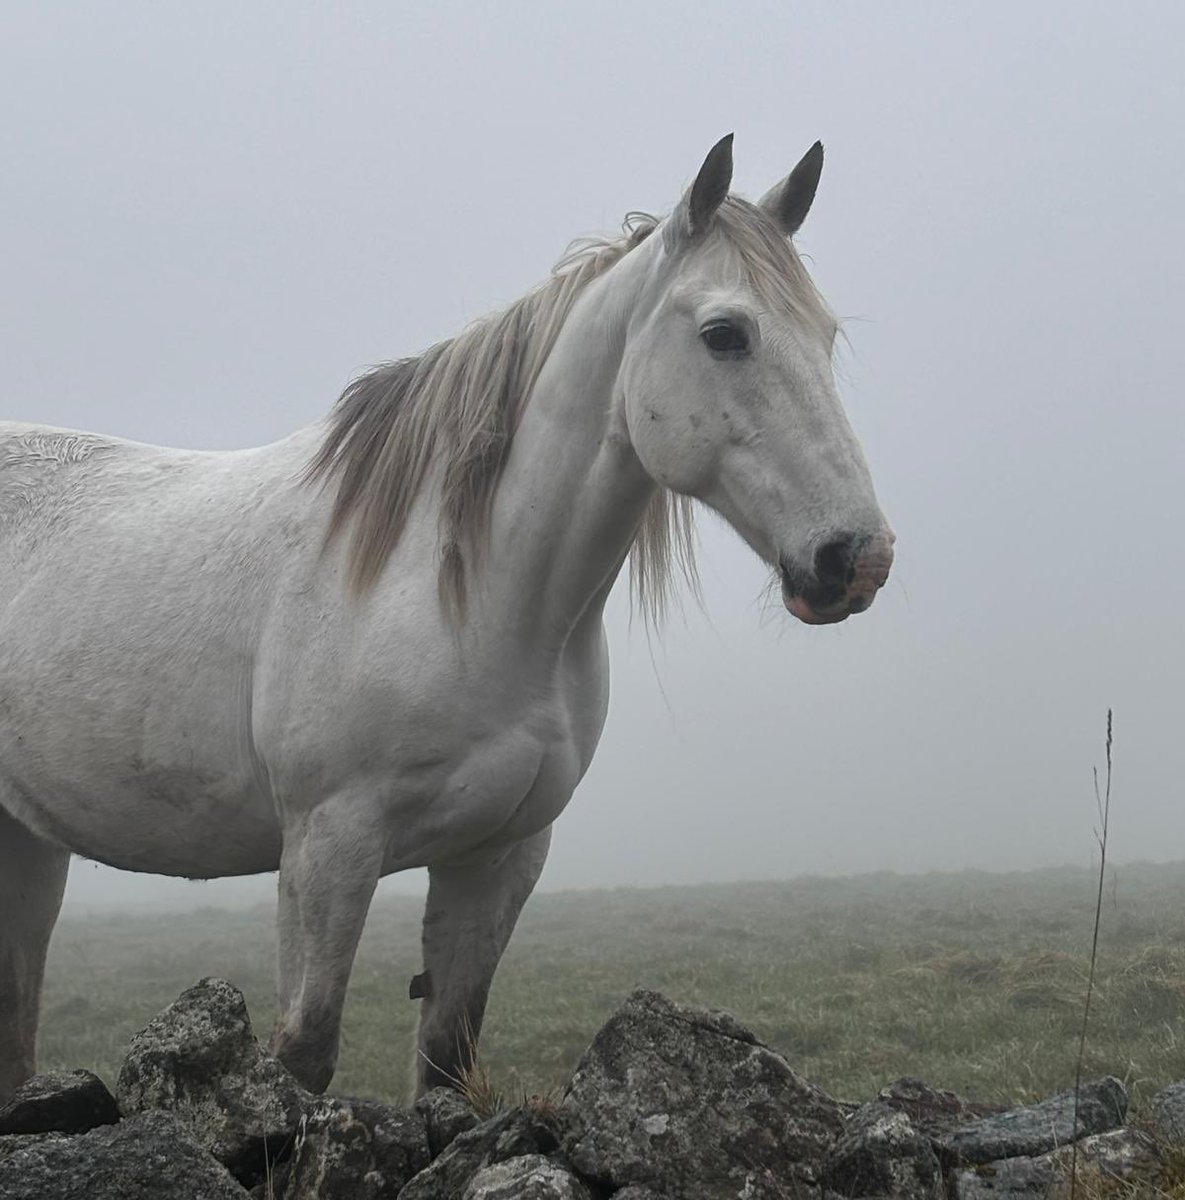 White horse in the mist at the Hellfirethis morning. #Bealtaine #thursdayvibes #Weather